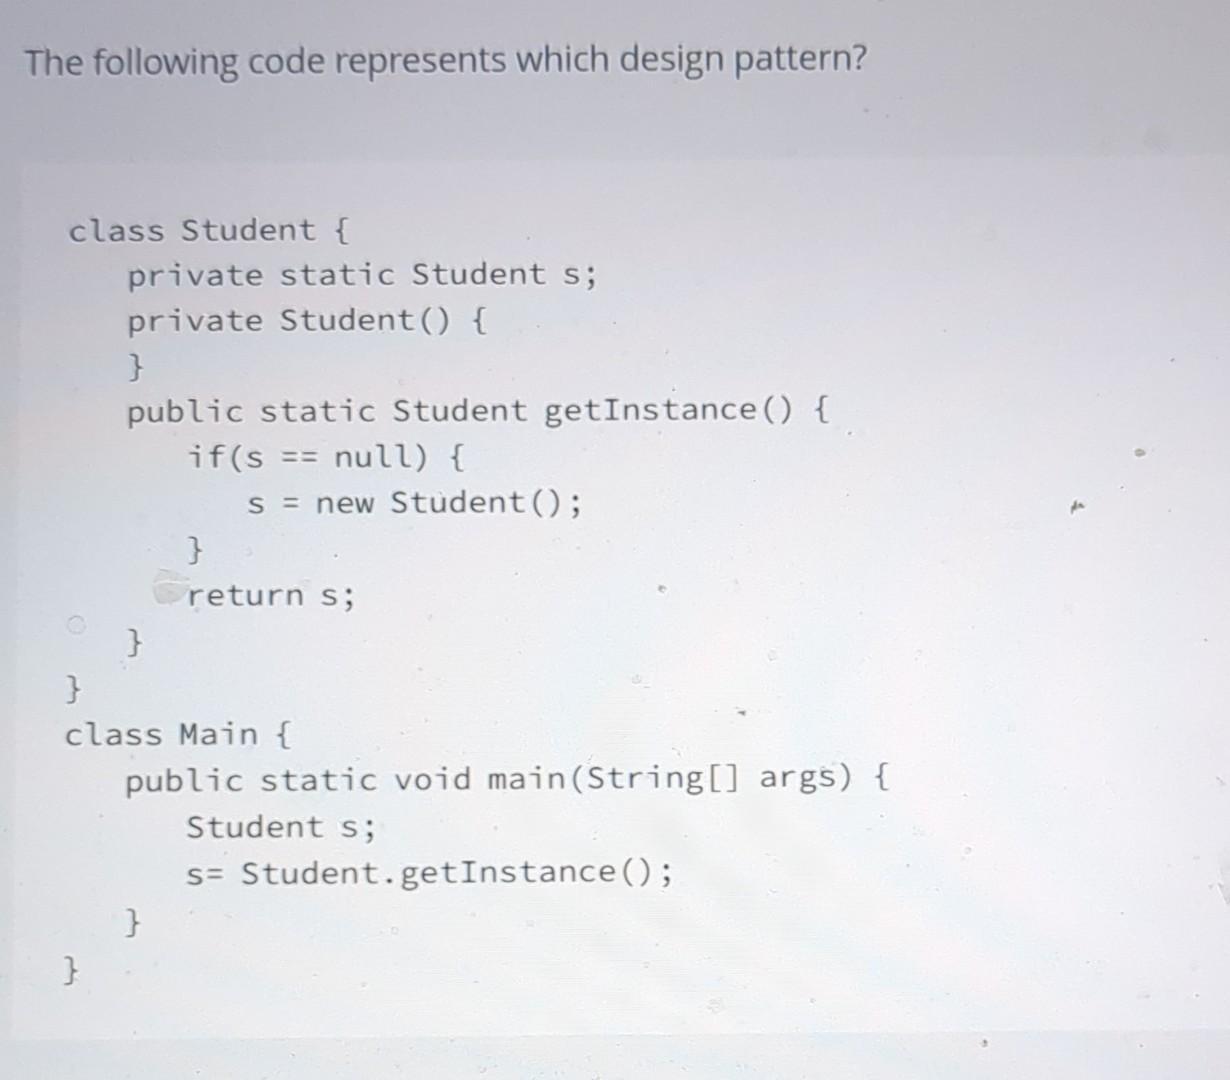 The following code represents which design pattern? class Student { private static Student s; private Student